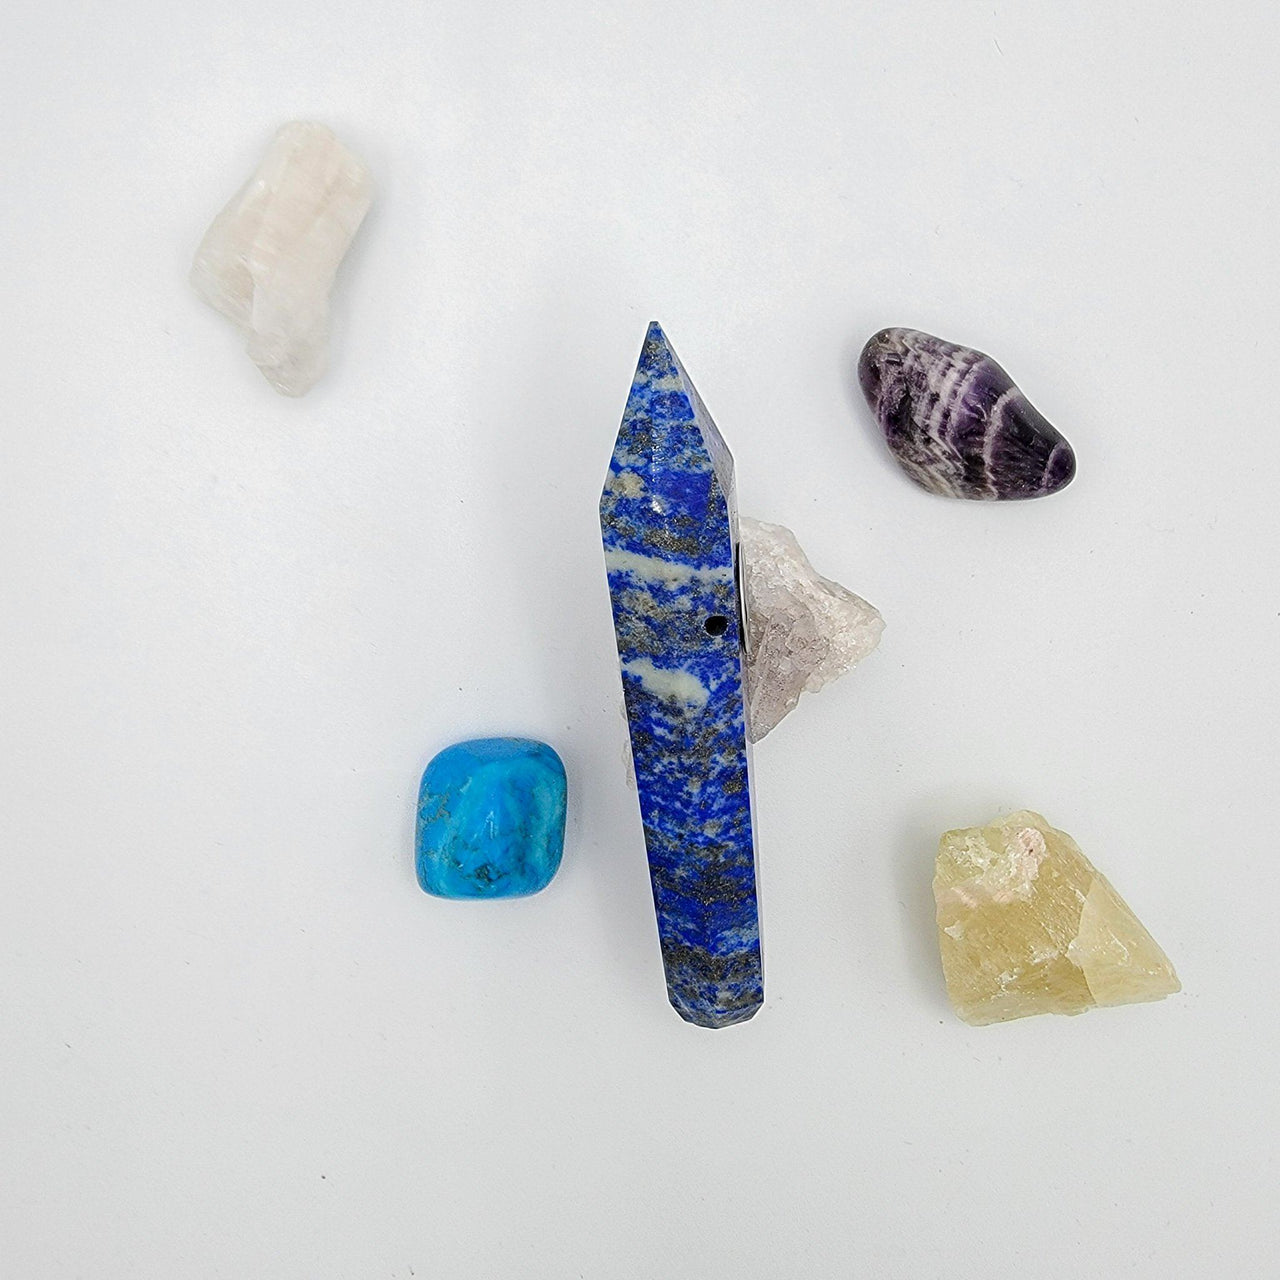 Purchase a Lapis Lazuli Crystal Pipe, a craft design in Canada, guaranteed to last and impress, real gemstone craft 